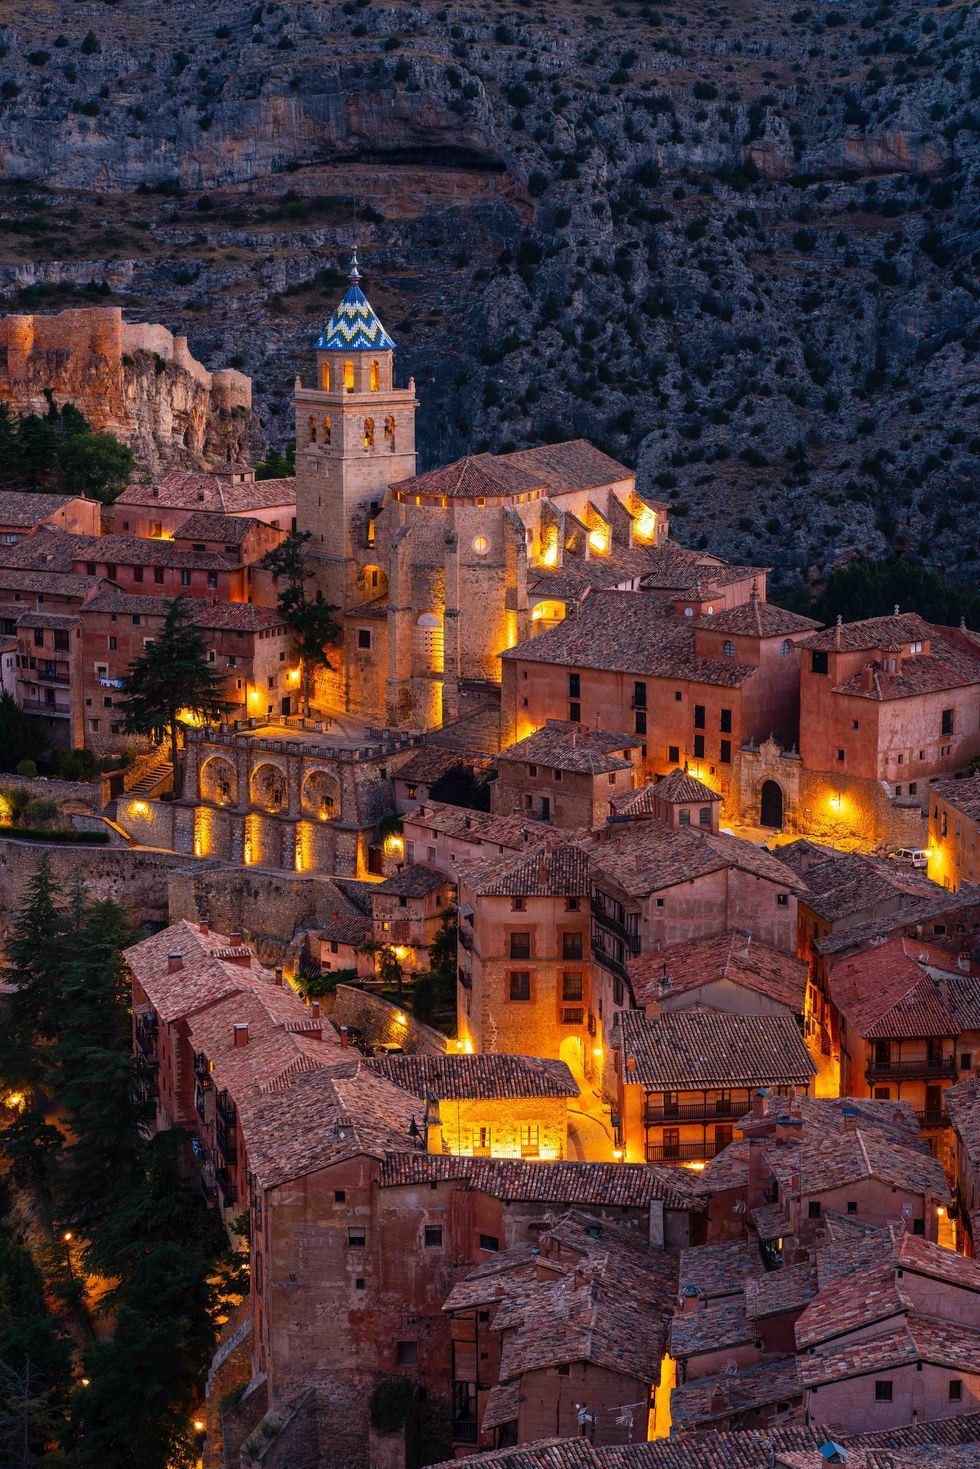 albarracin, spain july 20, 2020 albaracín is a small tourist town in the province of teruel